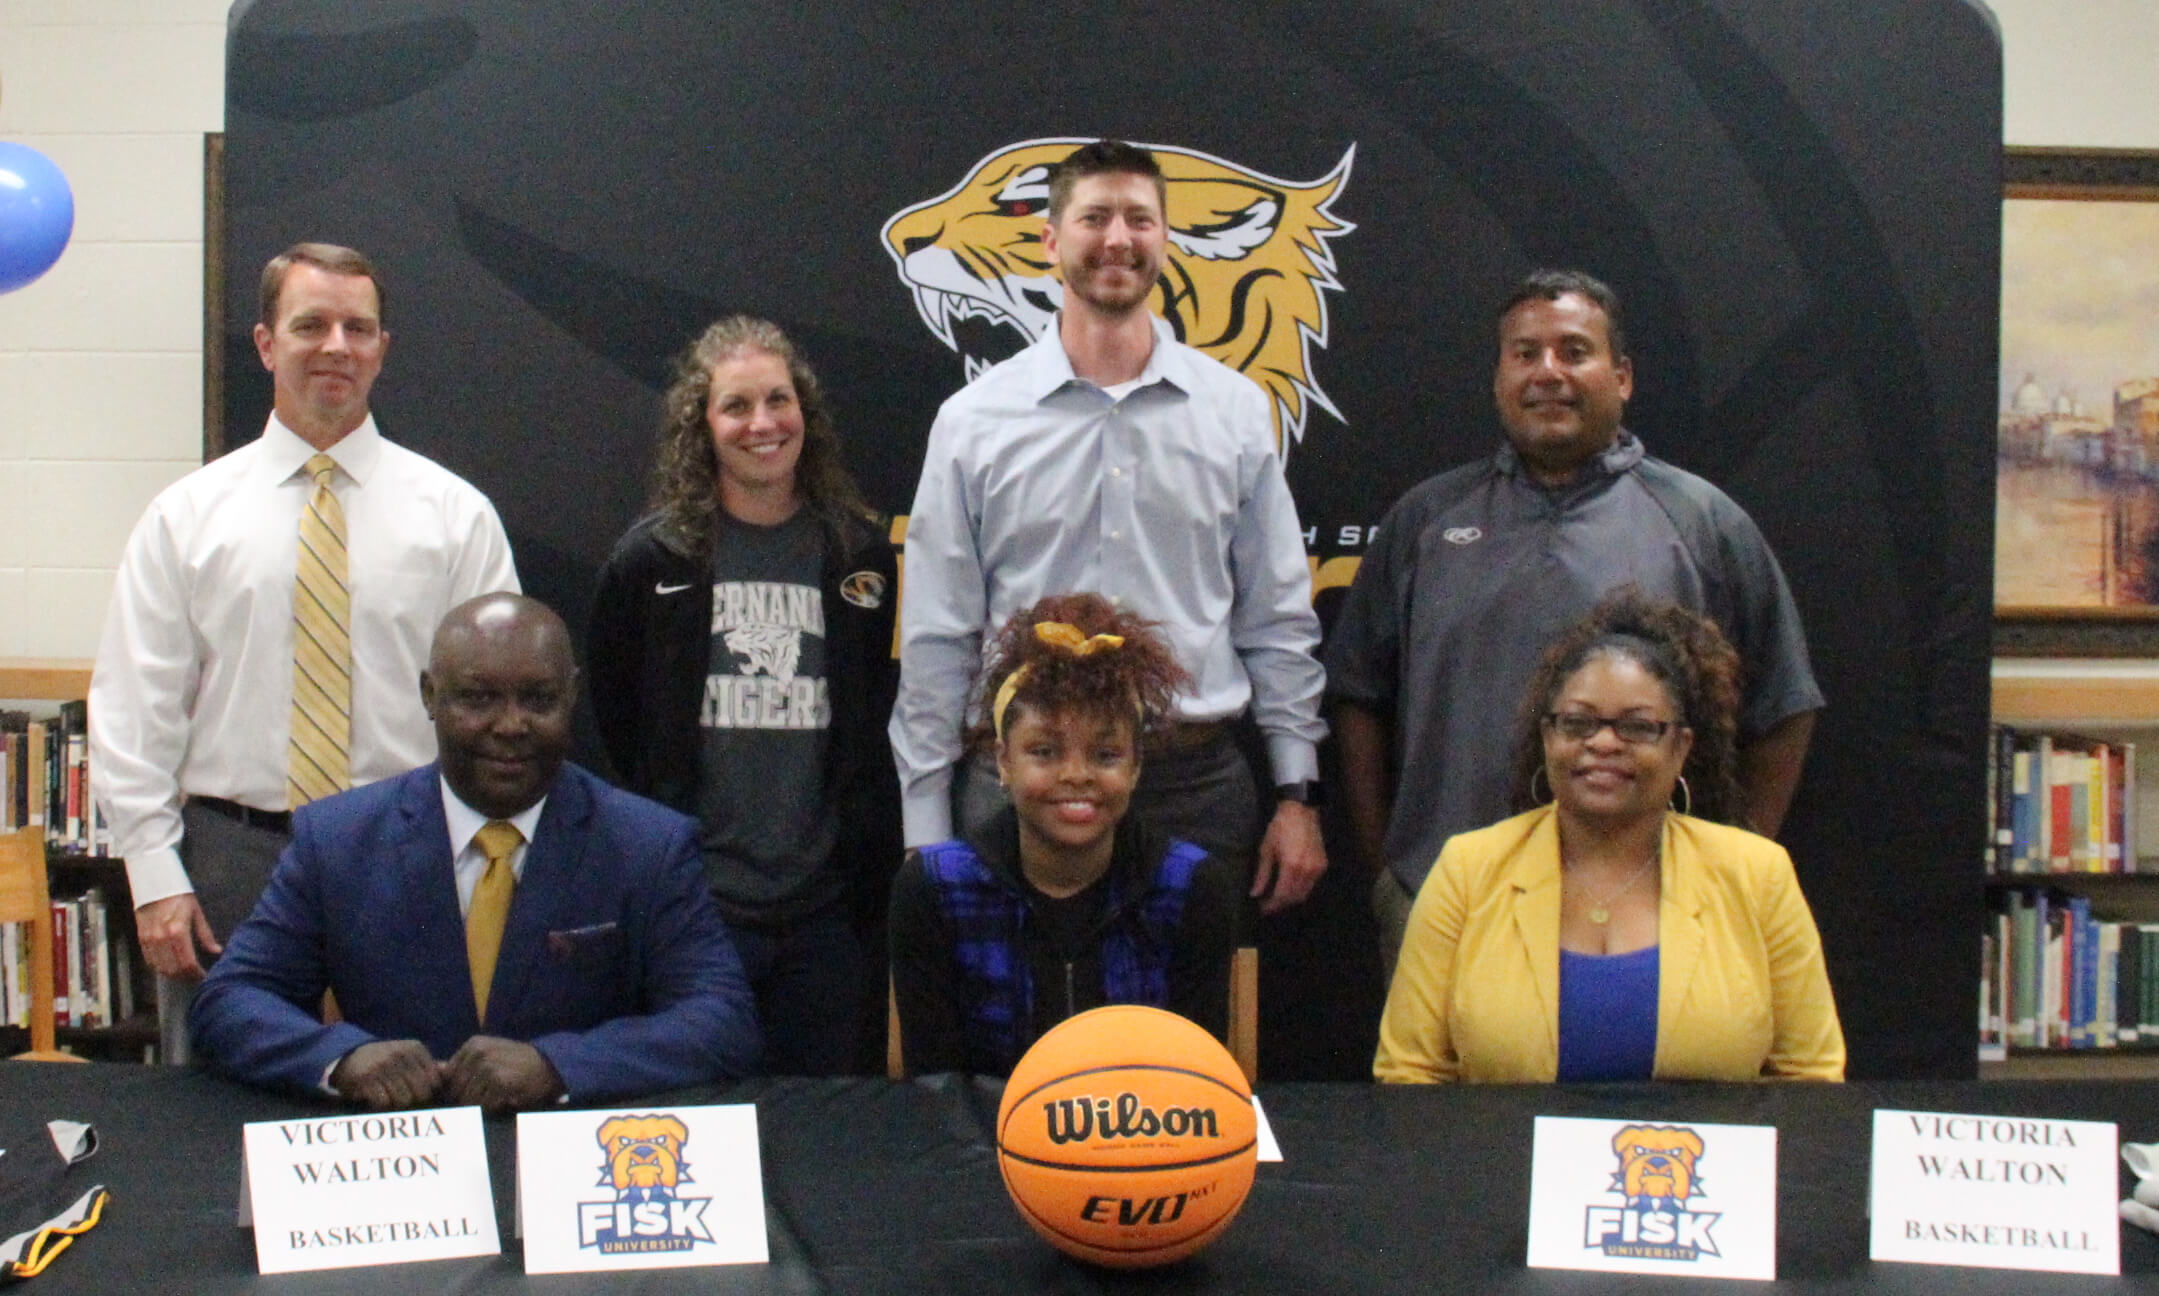 Walton signs with Fisk University